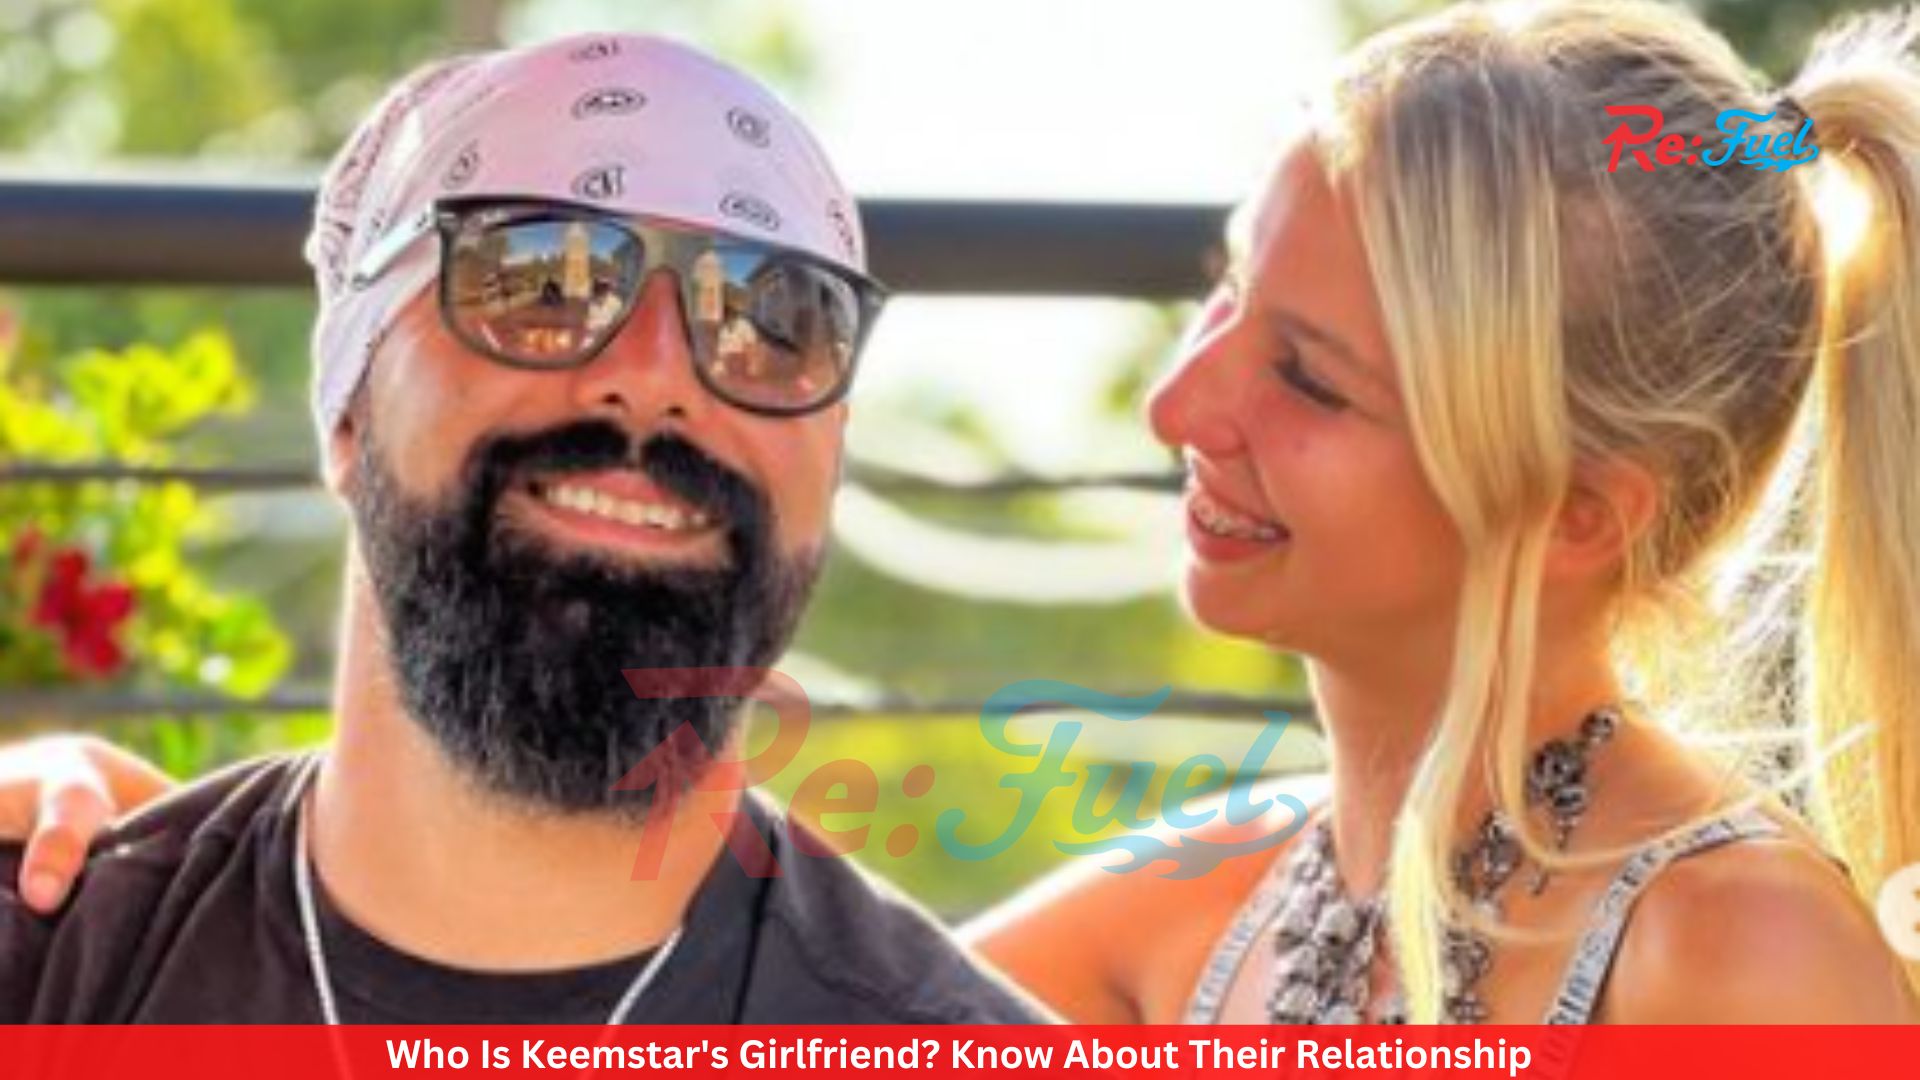 Who Is Keemstar's Girlfriend? Know About Their Relationship